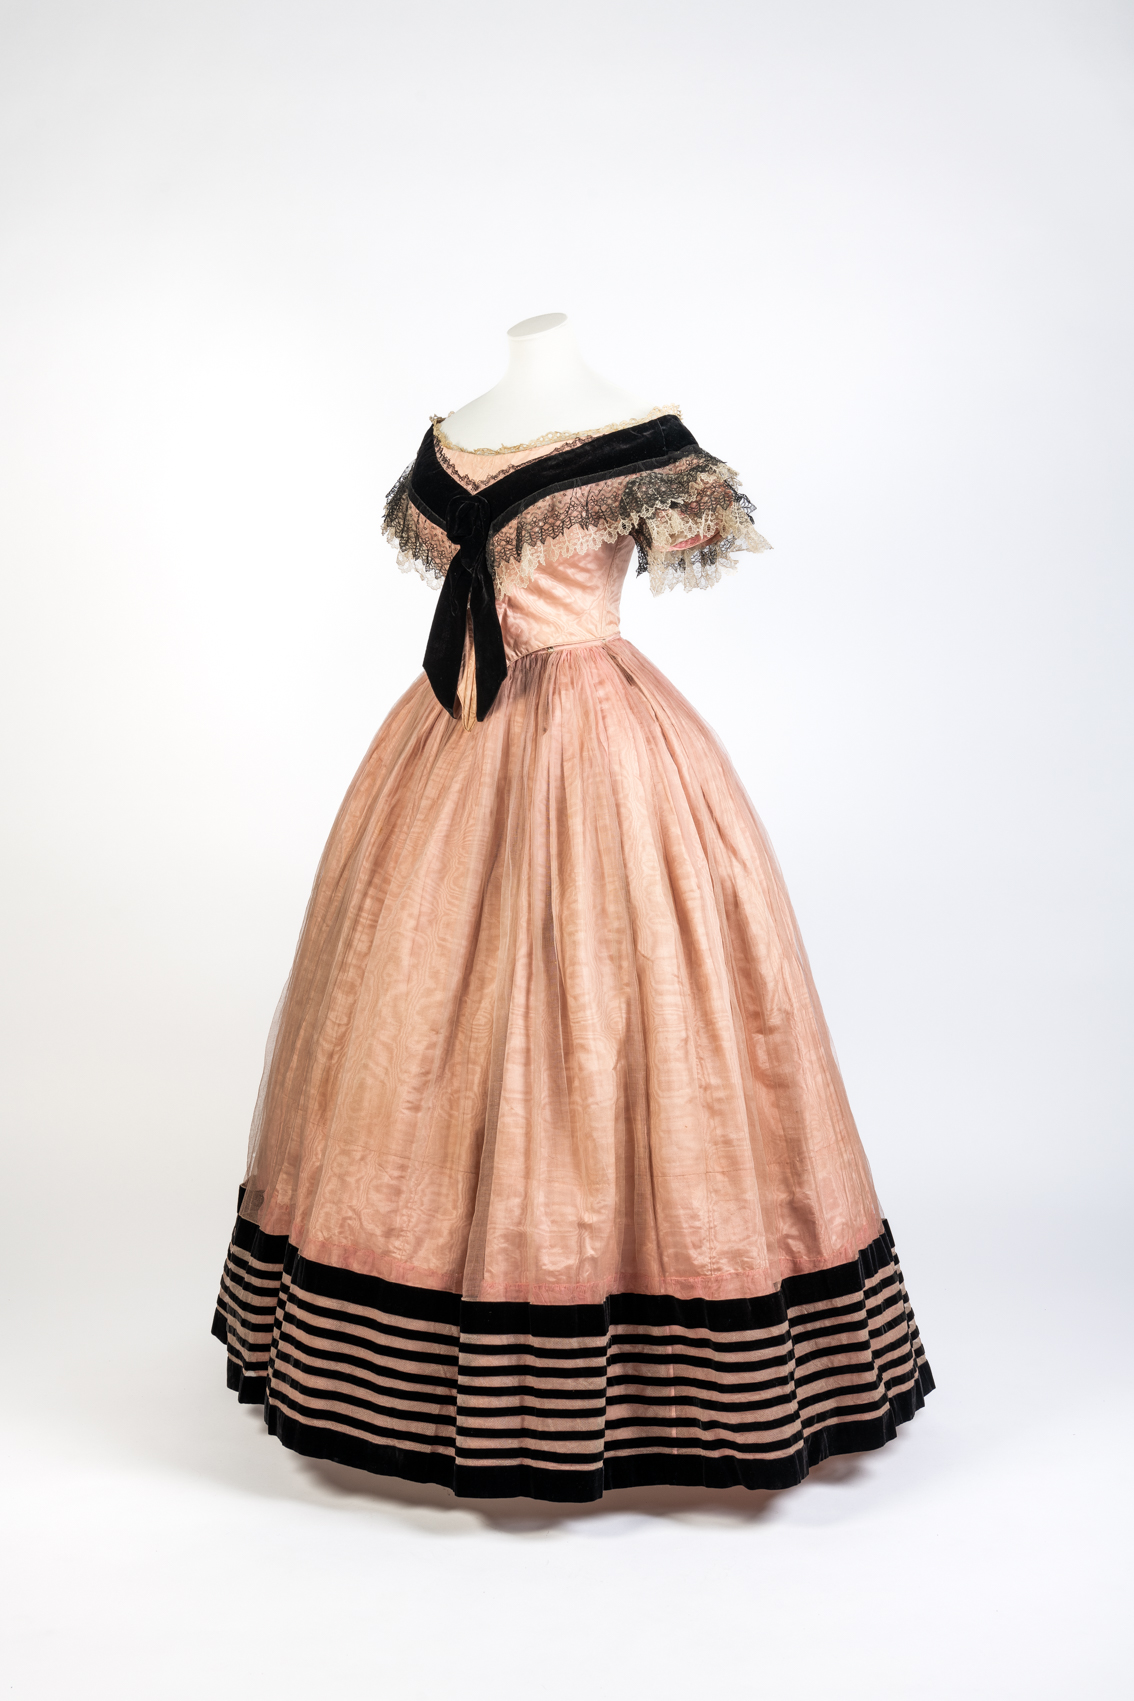 Pink Silk Moire Evening Dress, early 1860s, Fashion Museum Bath